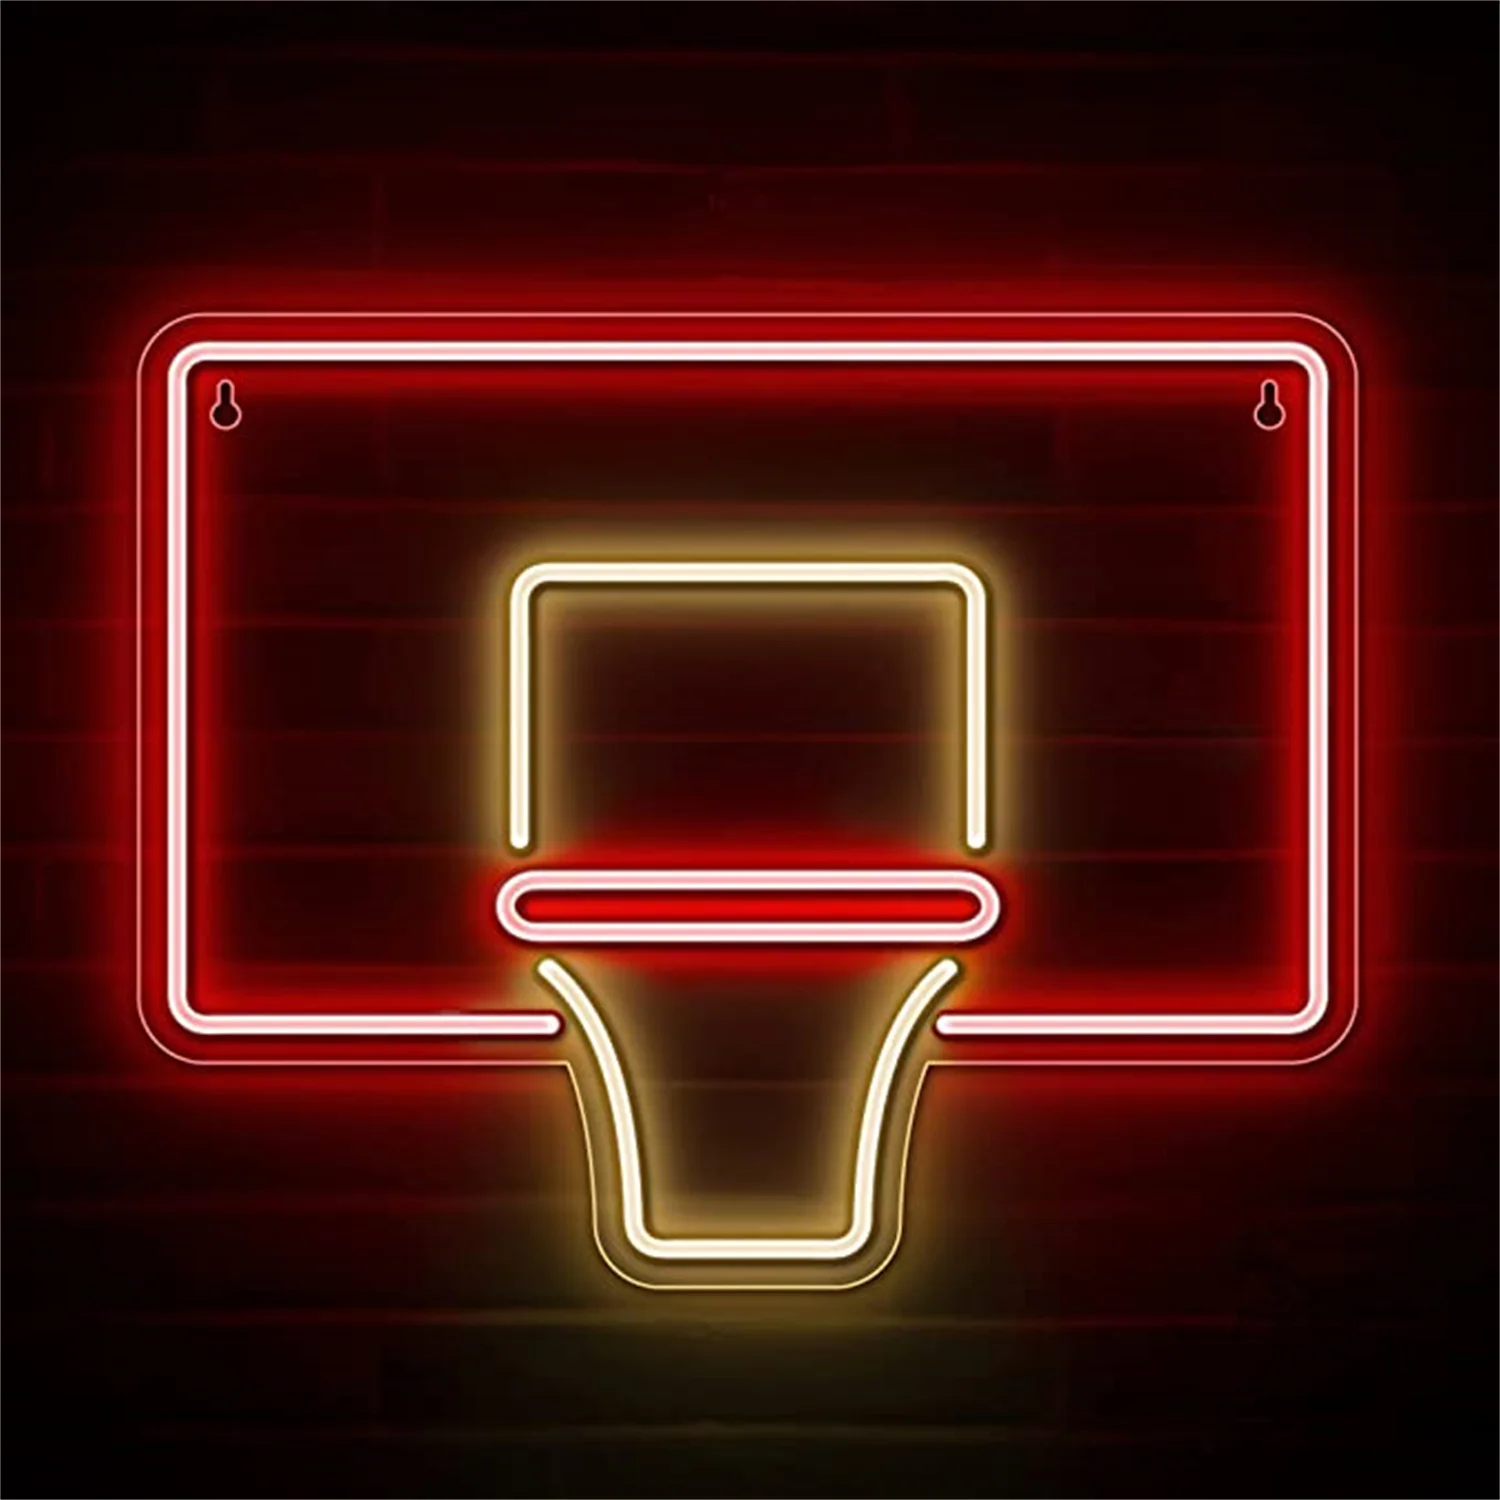 

Wanxing Basketball Hoop Neon Sign Lights for Basketball Players/Fans Backboard Goal Led Signs for Wall Bedroom Game Room Decor